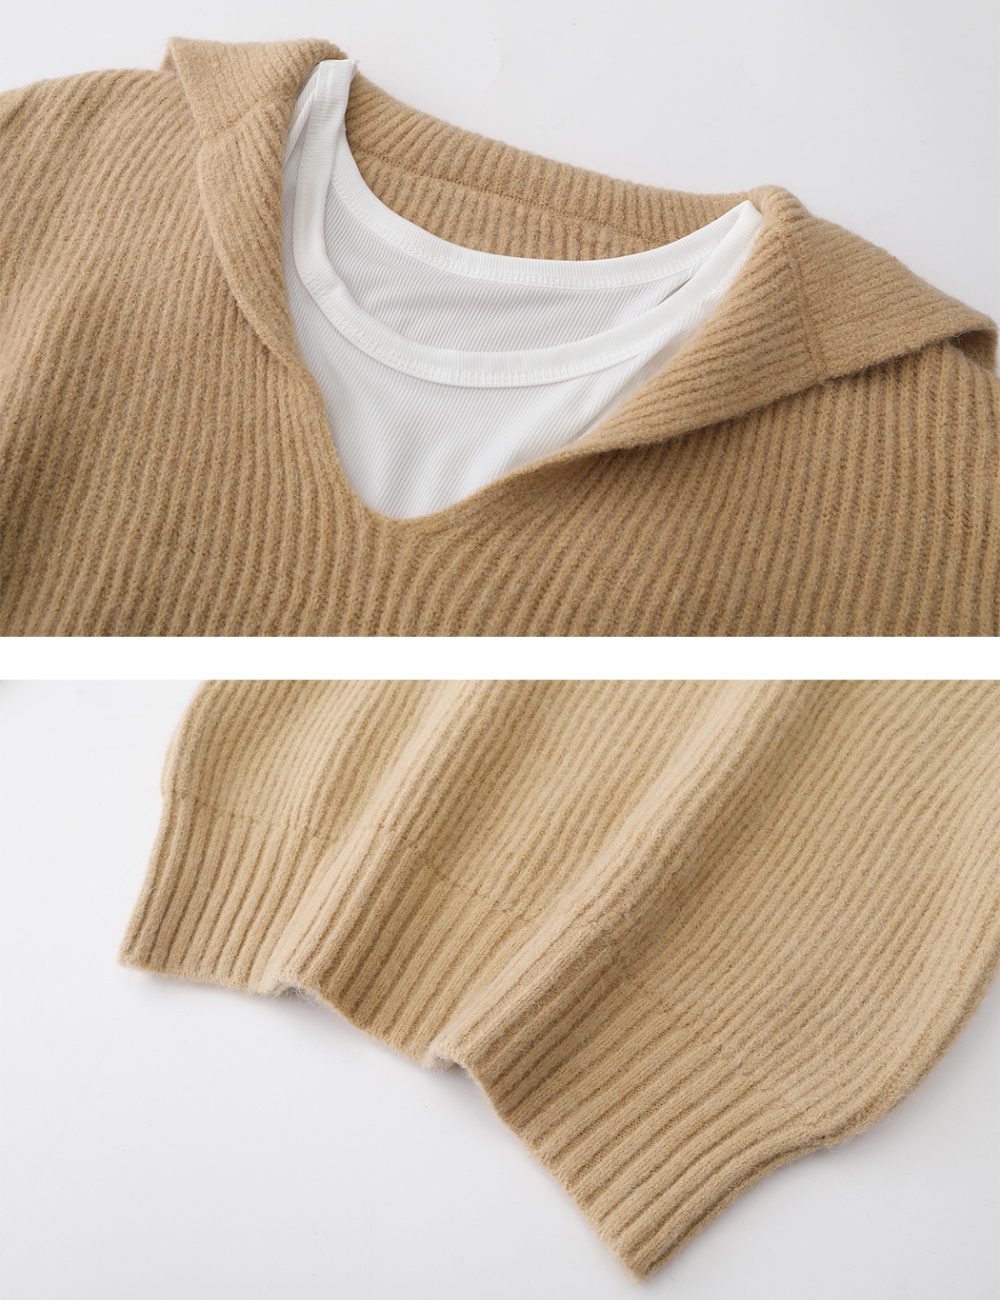 Winter small fellow tops knitted sweater for women